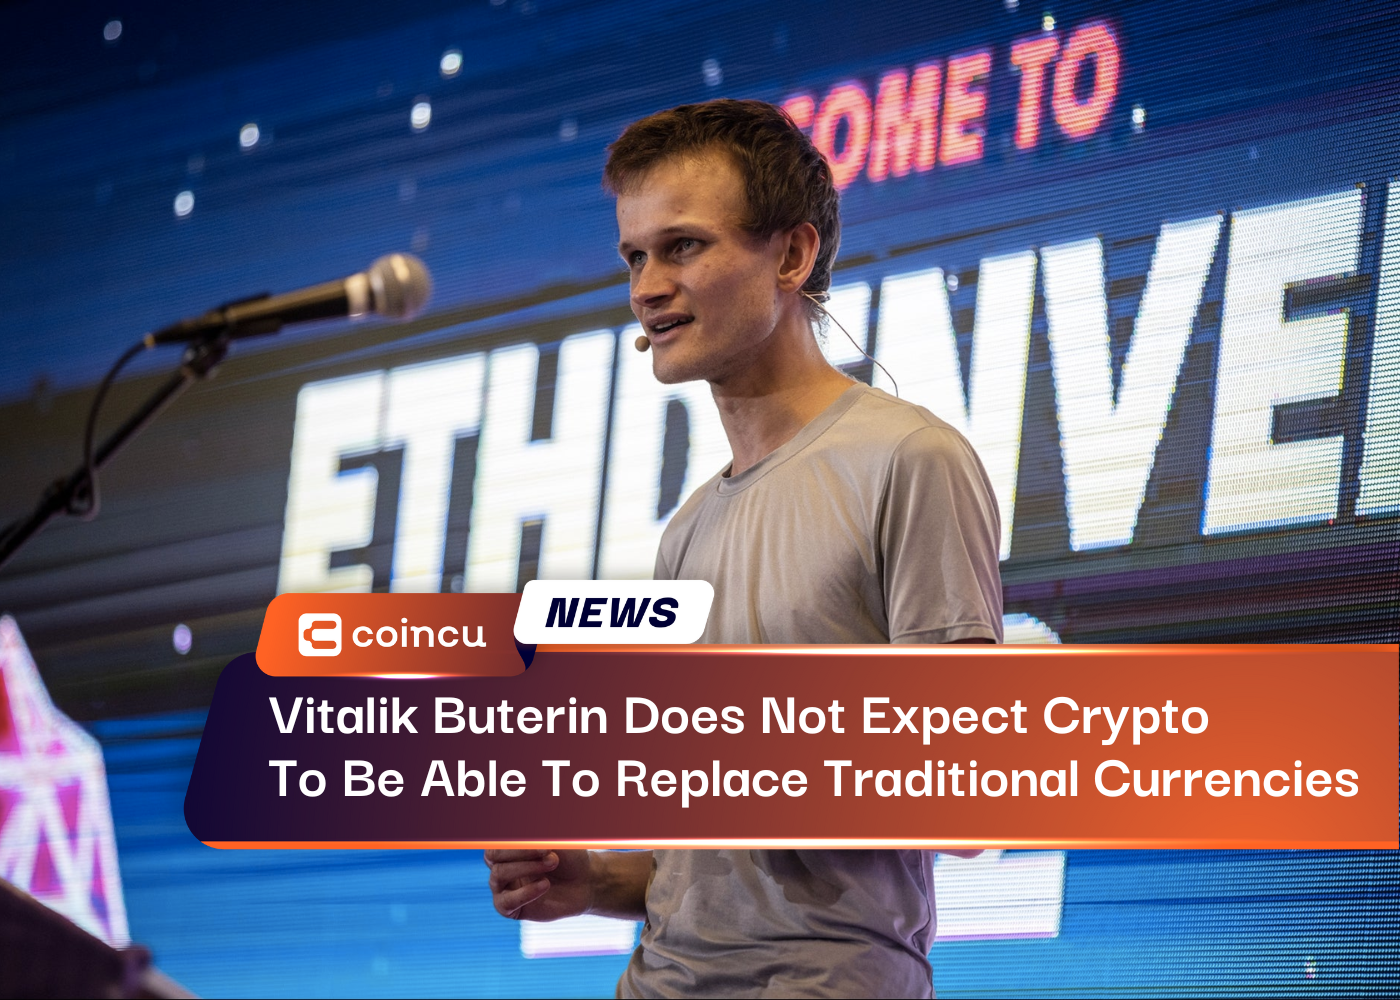 Vitalik Buterin Does Not Expect Crypto To Be Able To Replace Traditional Currencies